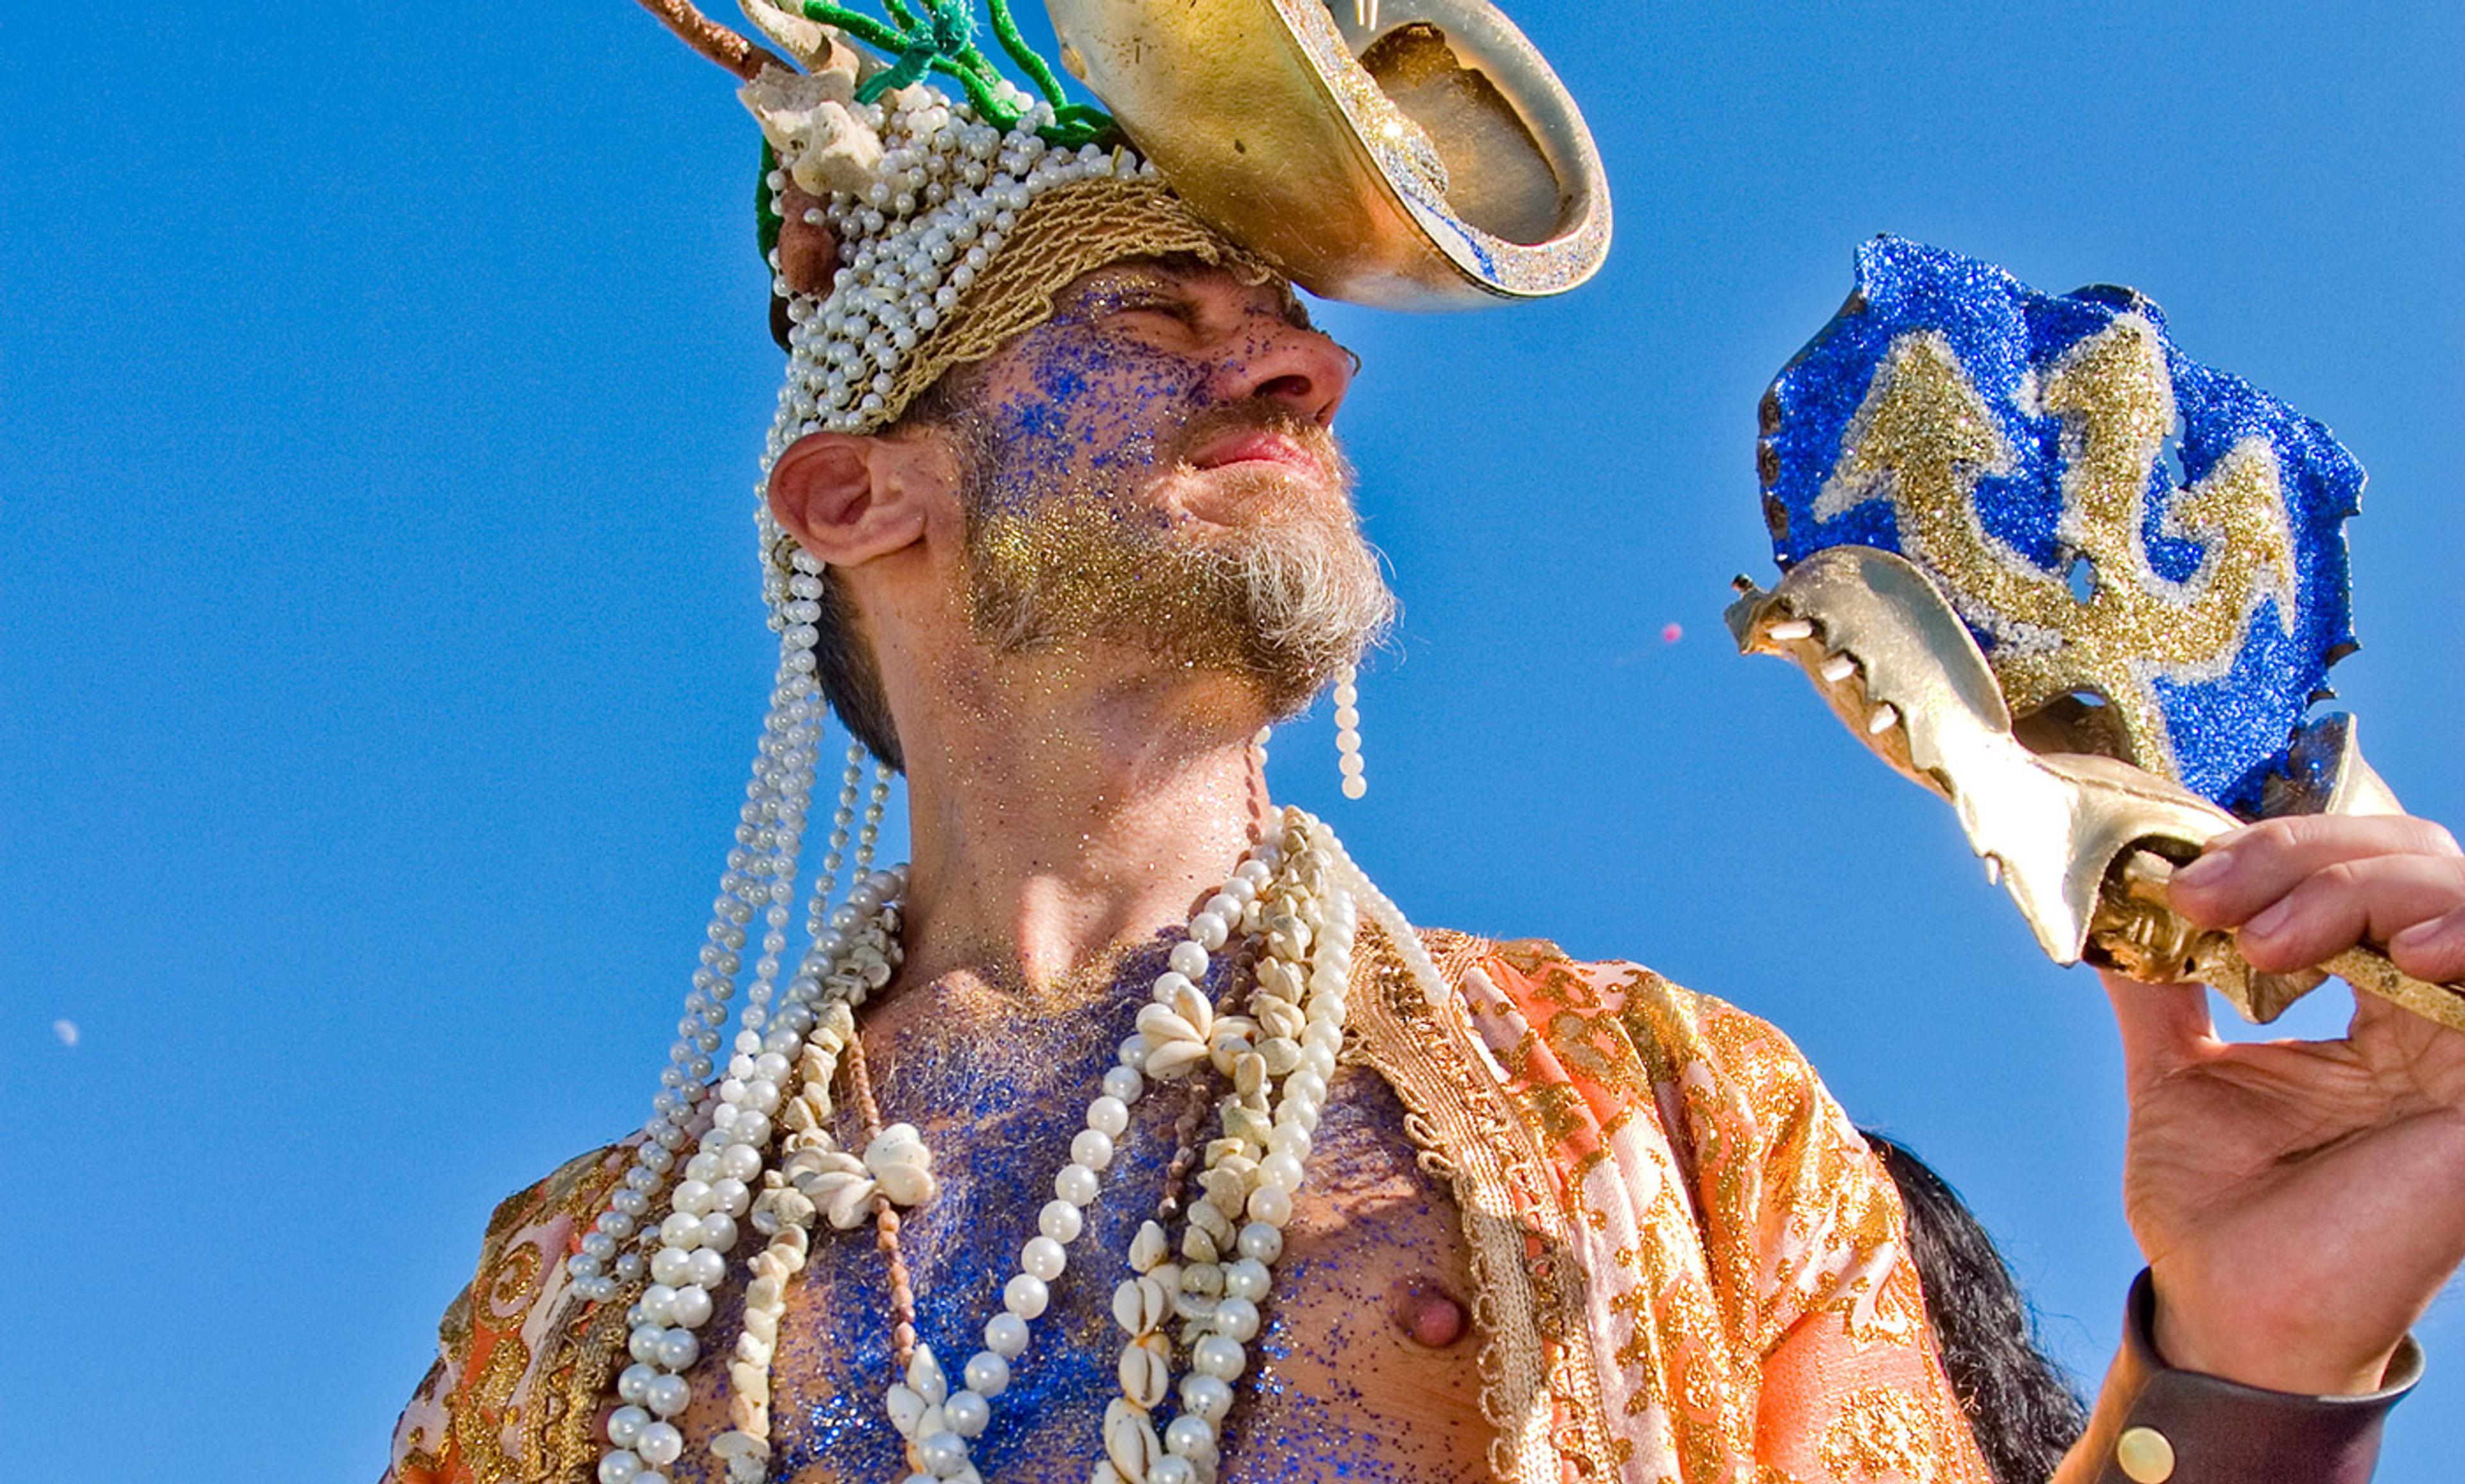 <p>Poseidon at the Mermaid Parade, Coney Island. <em>Photo by See-Ming Lee/Flickr</em></p>